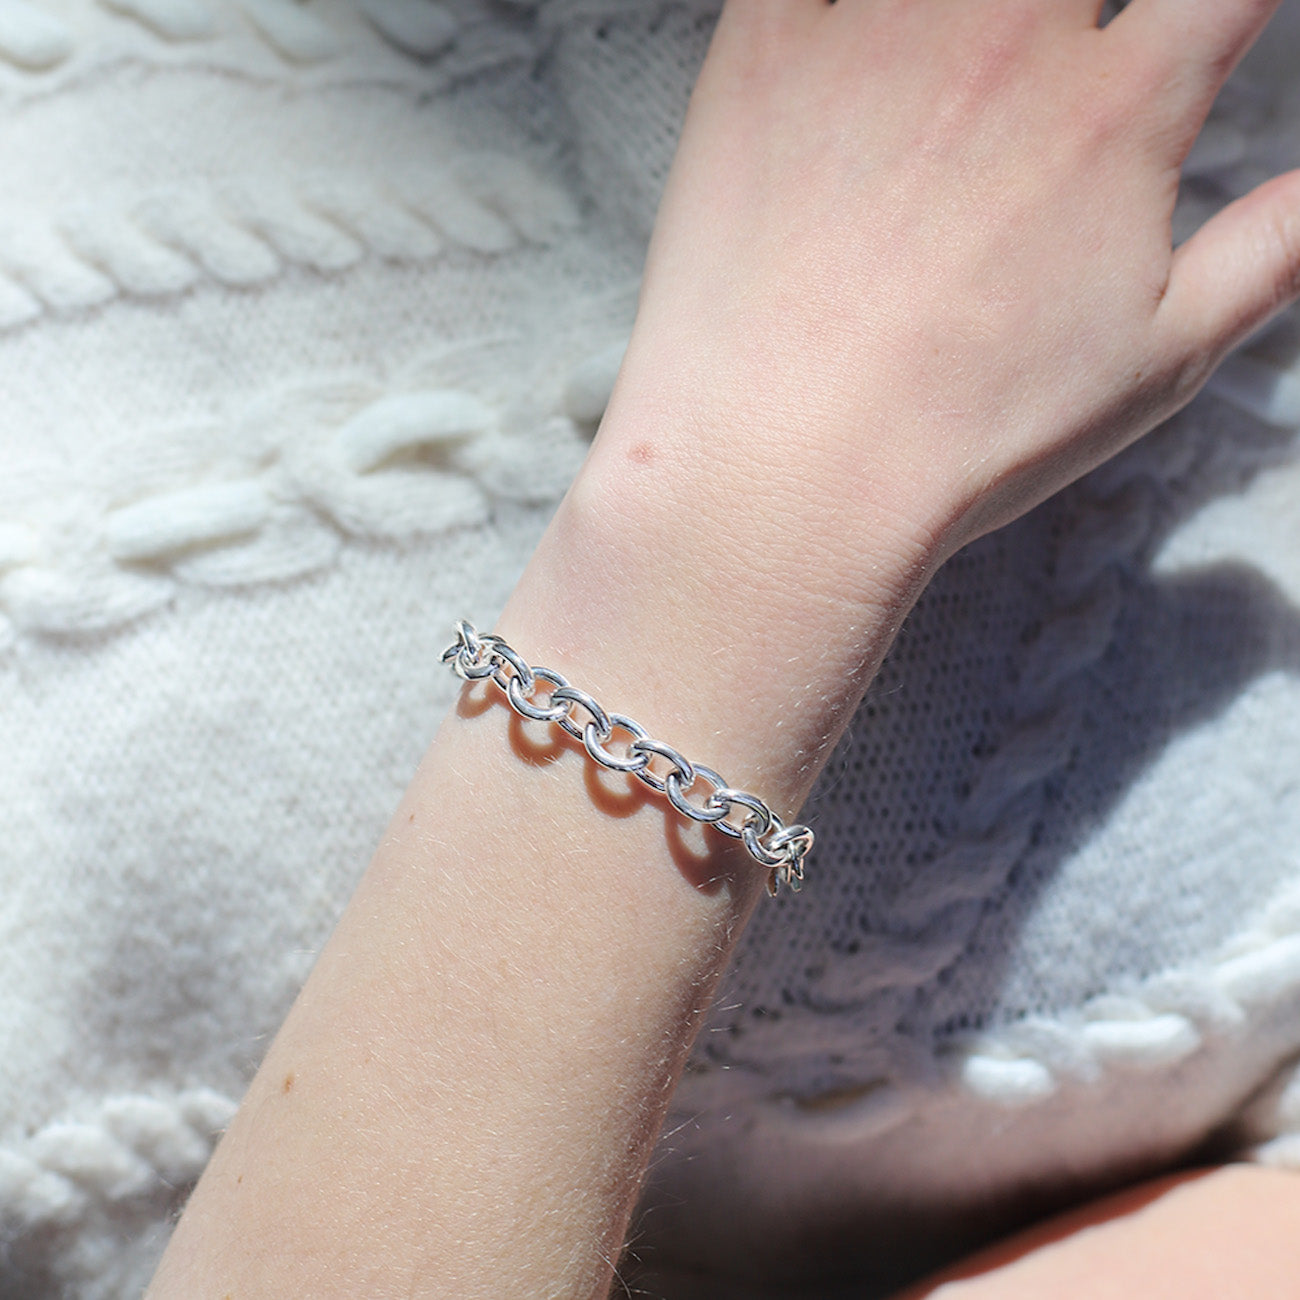 Classic Sterling Silver Chain Bracelet